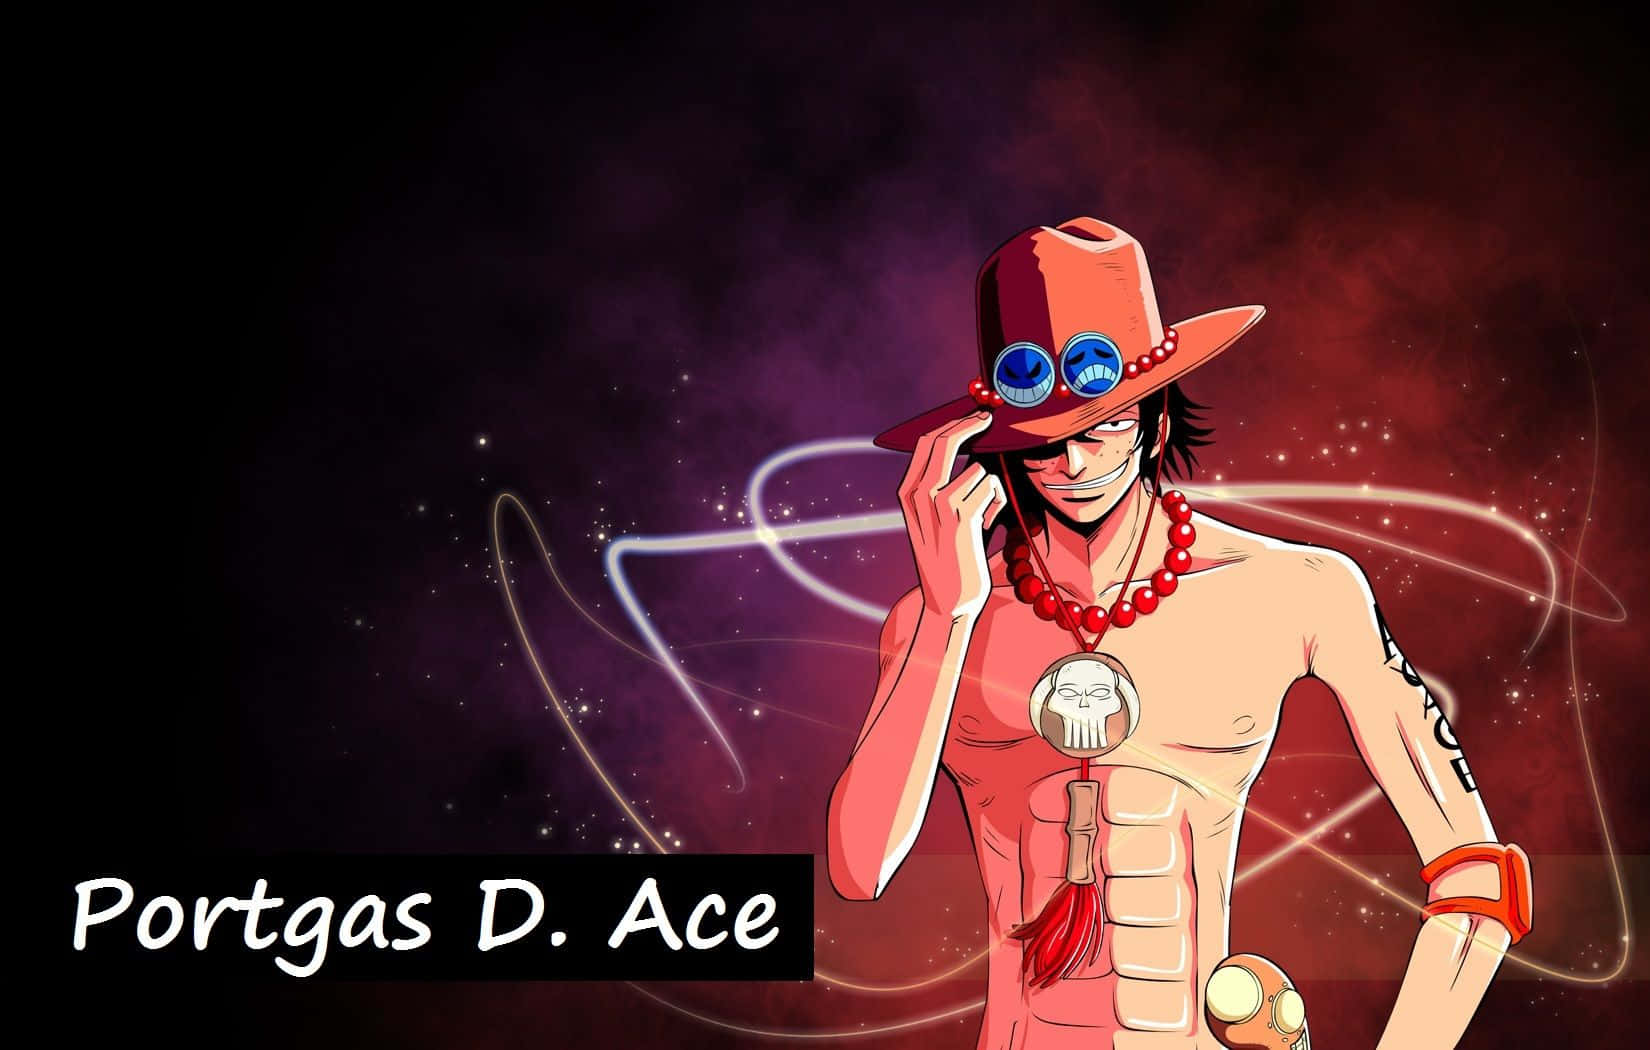 Take Command - The Fiery Portgas D. Ace Wallpaper